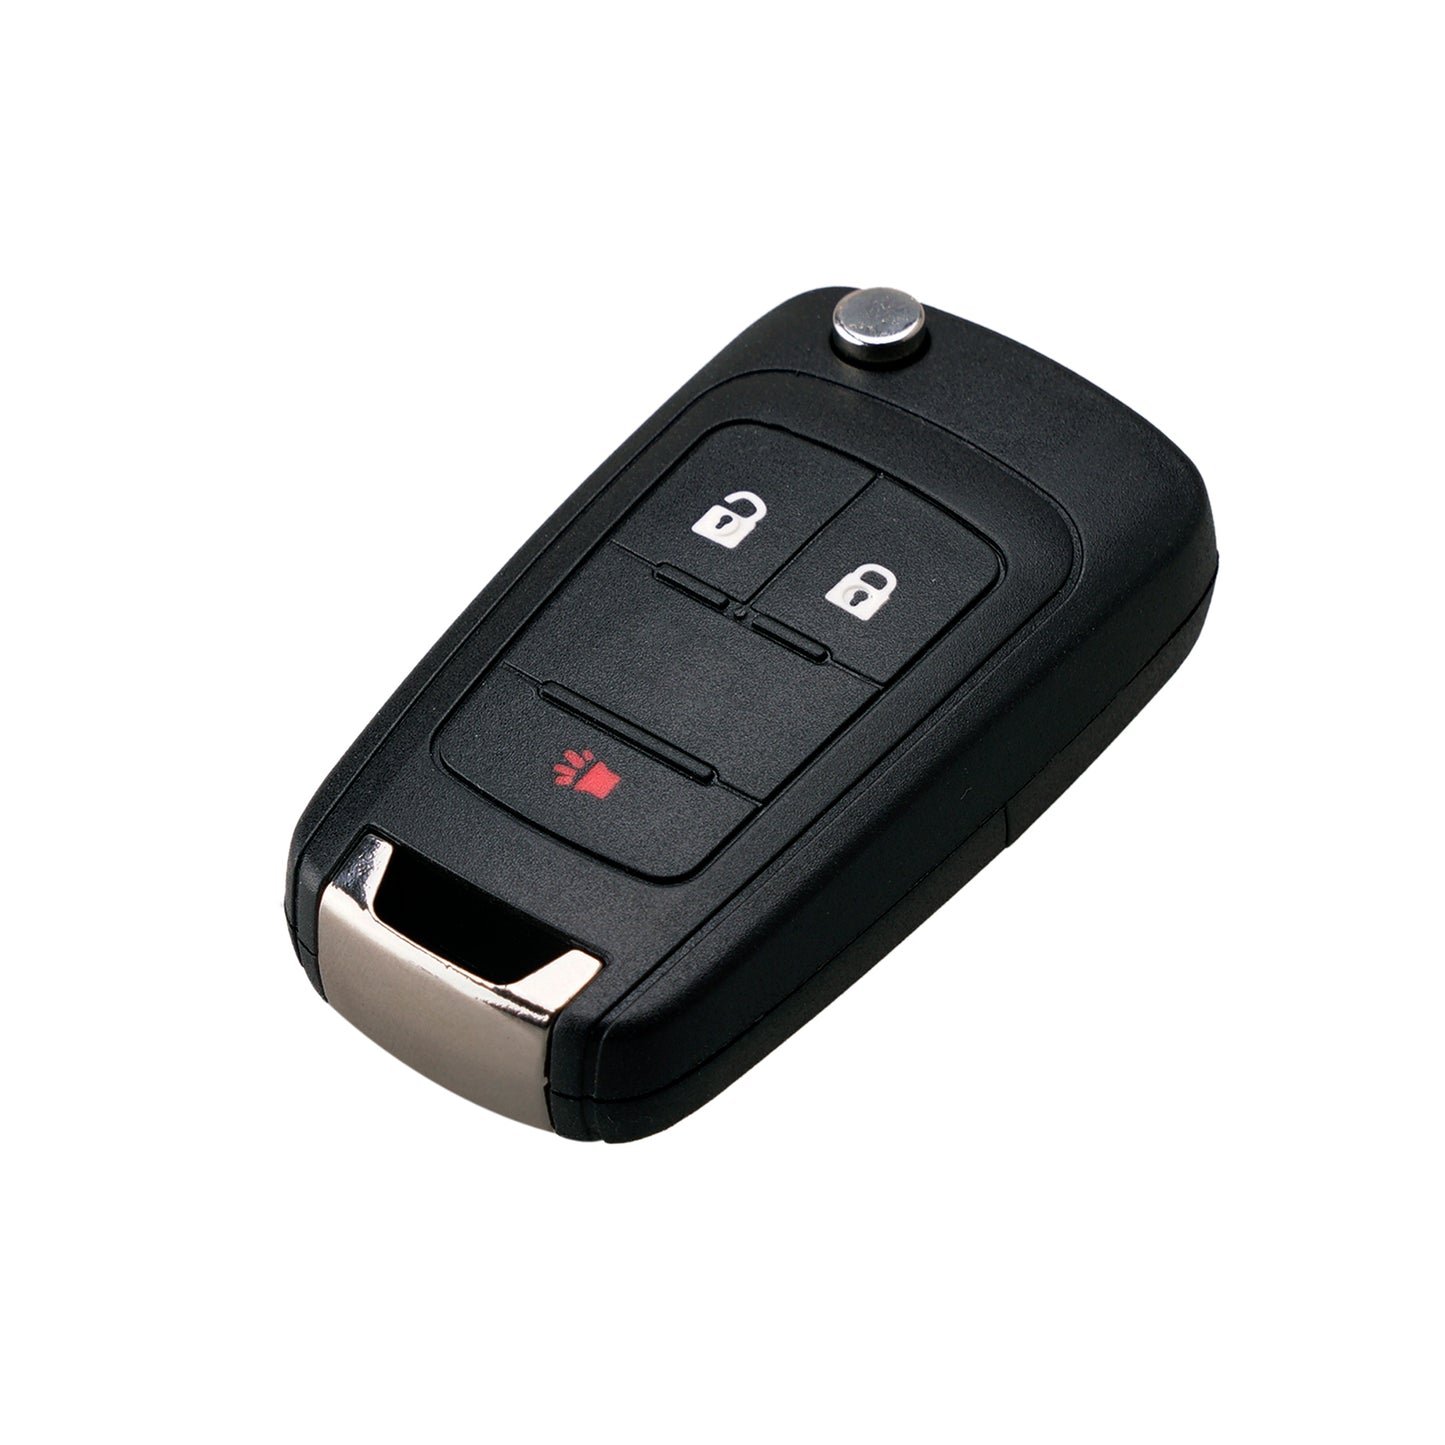 3 Buttons 315MHz Keyless Entry Fob Remote Car Key For2010-2019 Chevrolet Equinox Sonic Spark Trax 2010 - 2019 GMC Terrain FCC ID: OHT01060512 OHT01060512 V2T01060512  V2T01060514 AVL-B01T1AC AVL-B01T2AC SKU : J336